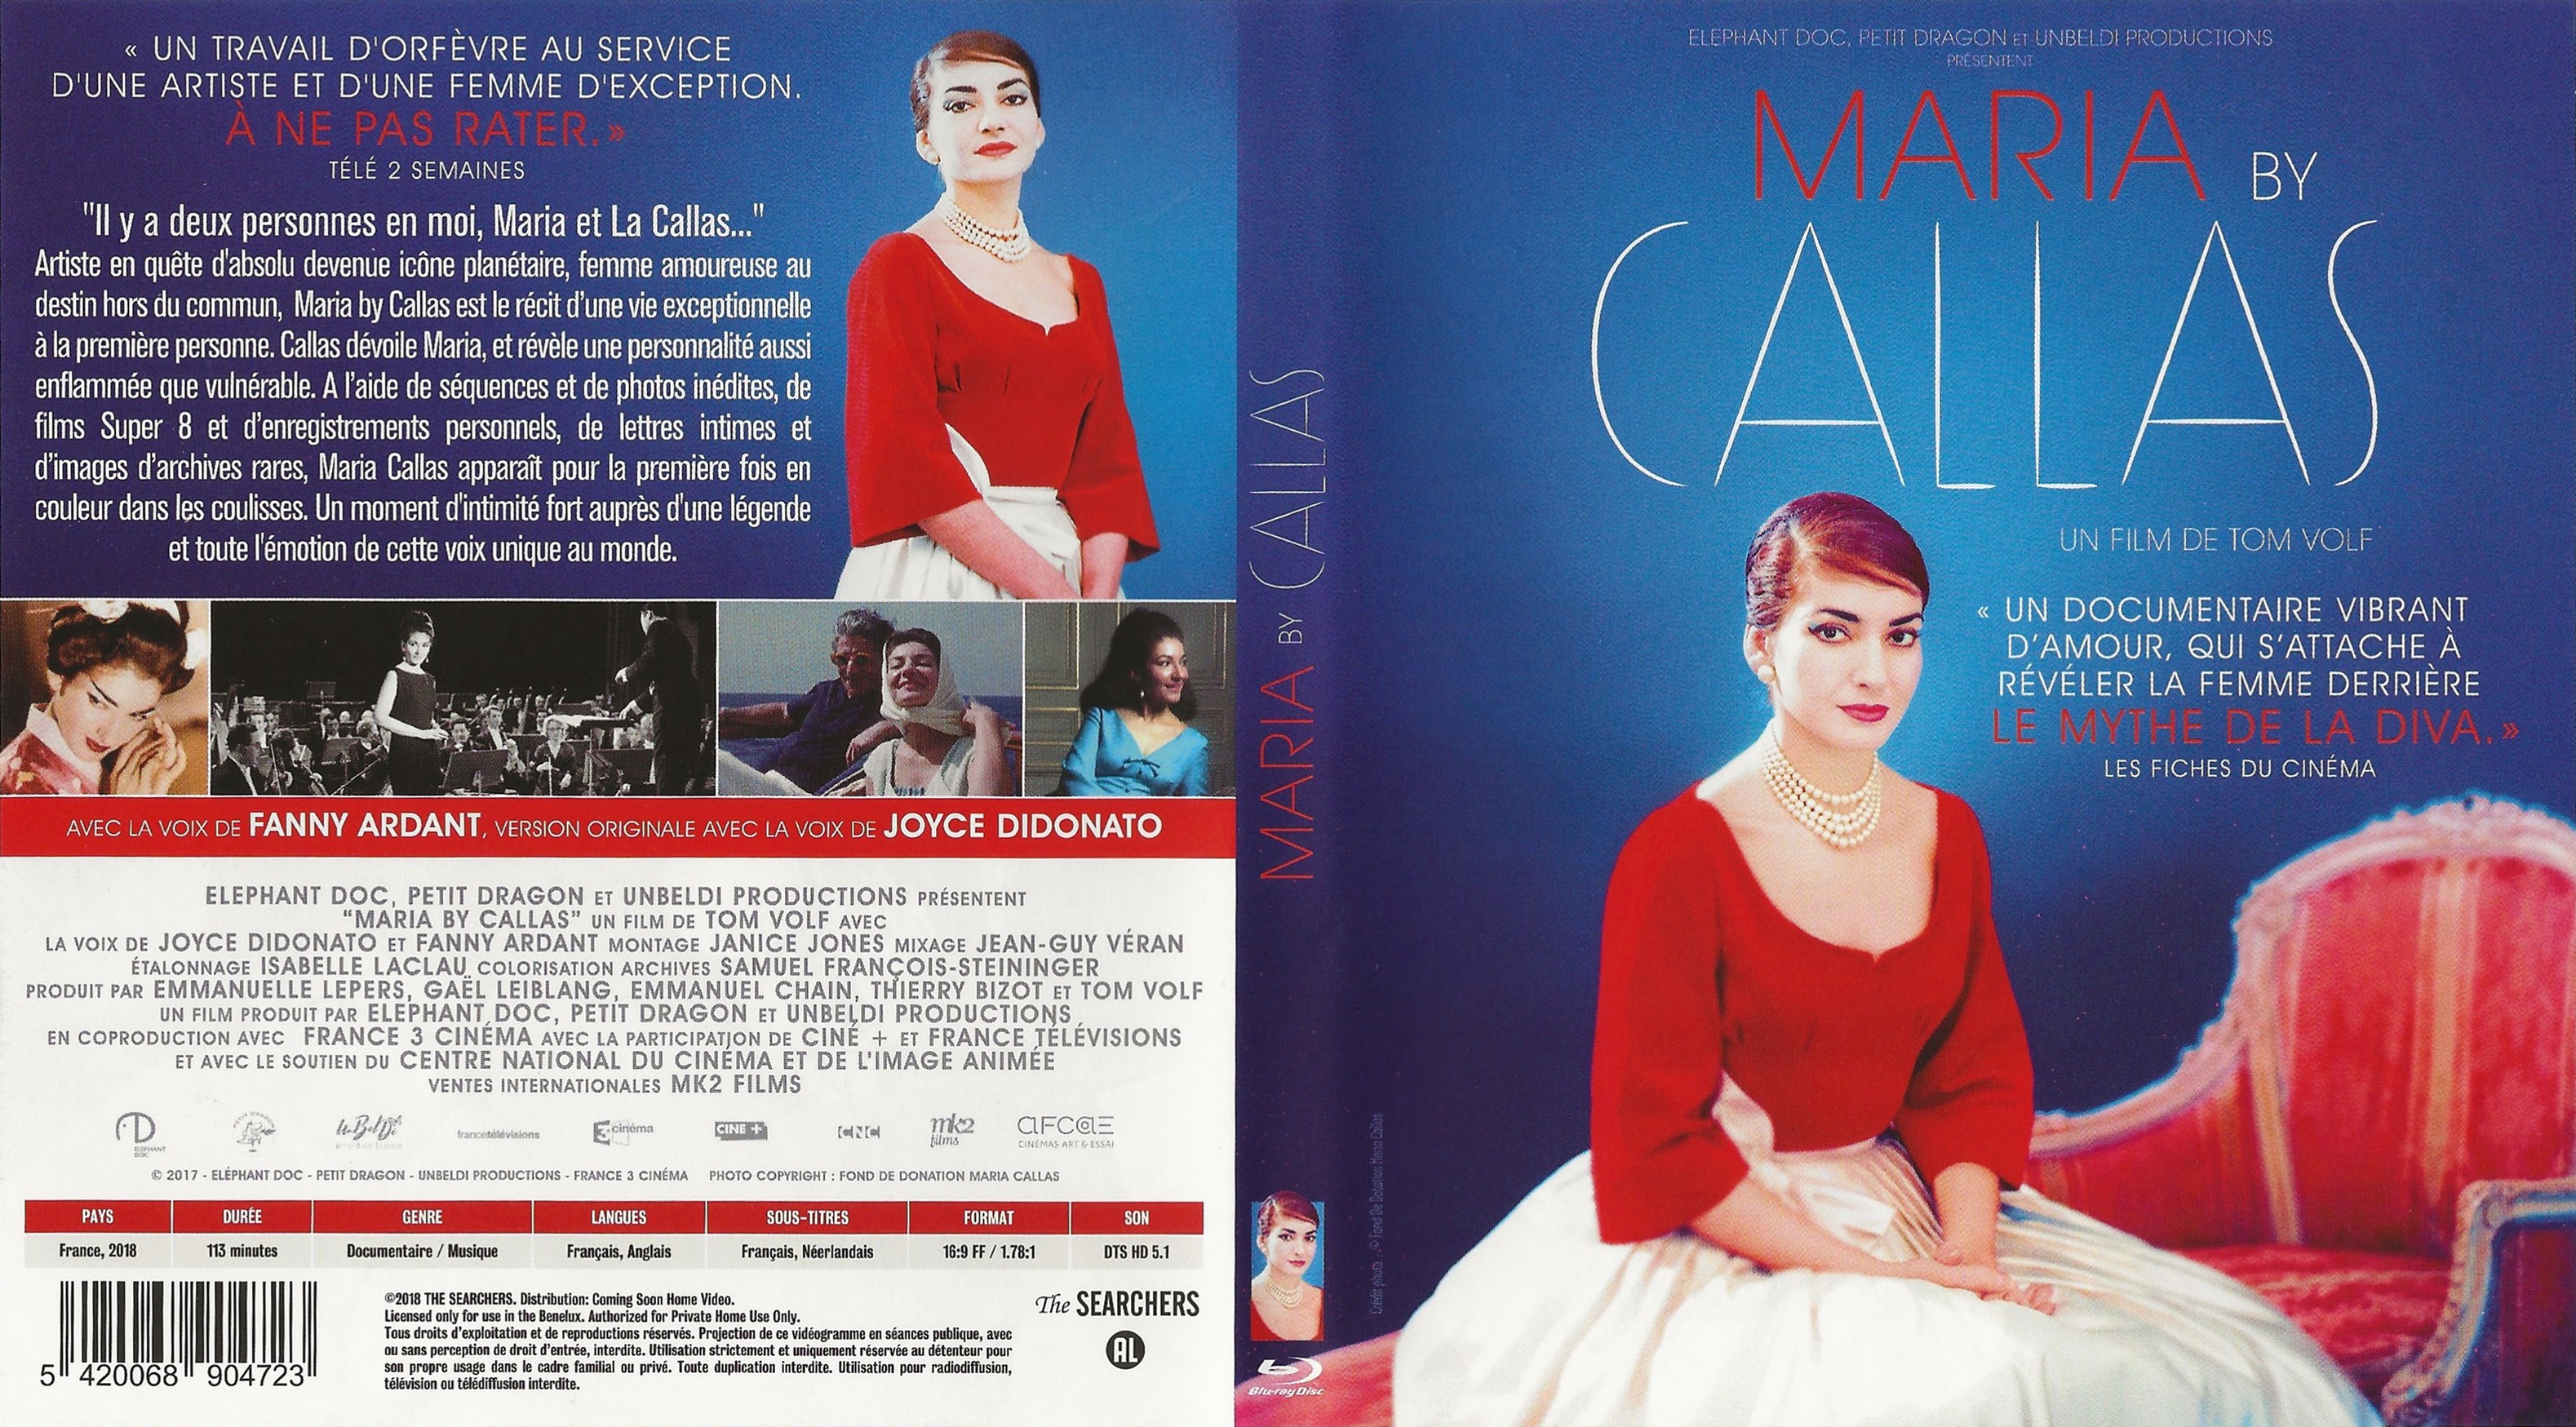 Jaquette DVD Maria by Callas (BLU-RAY)